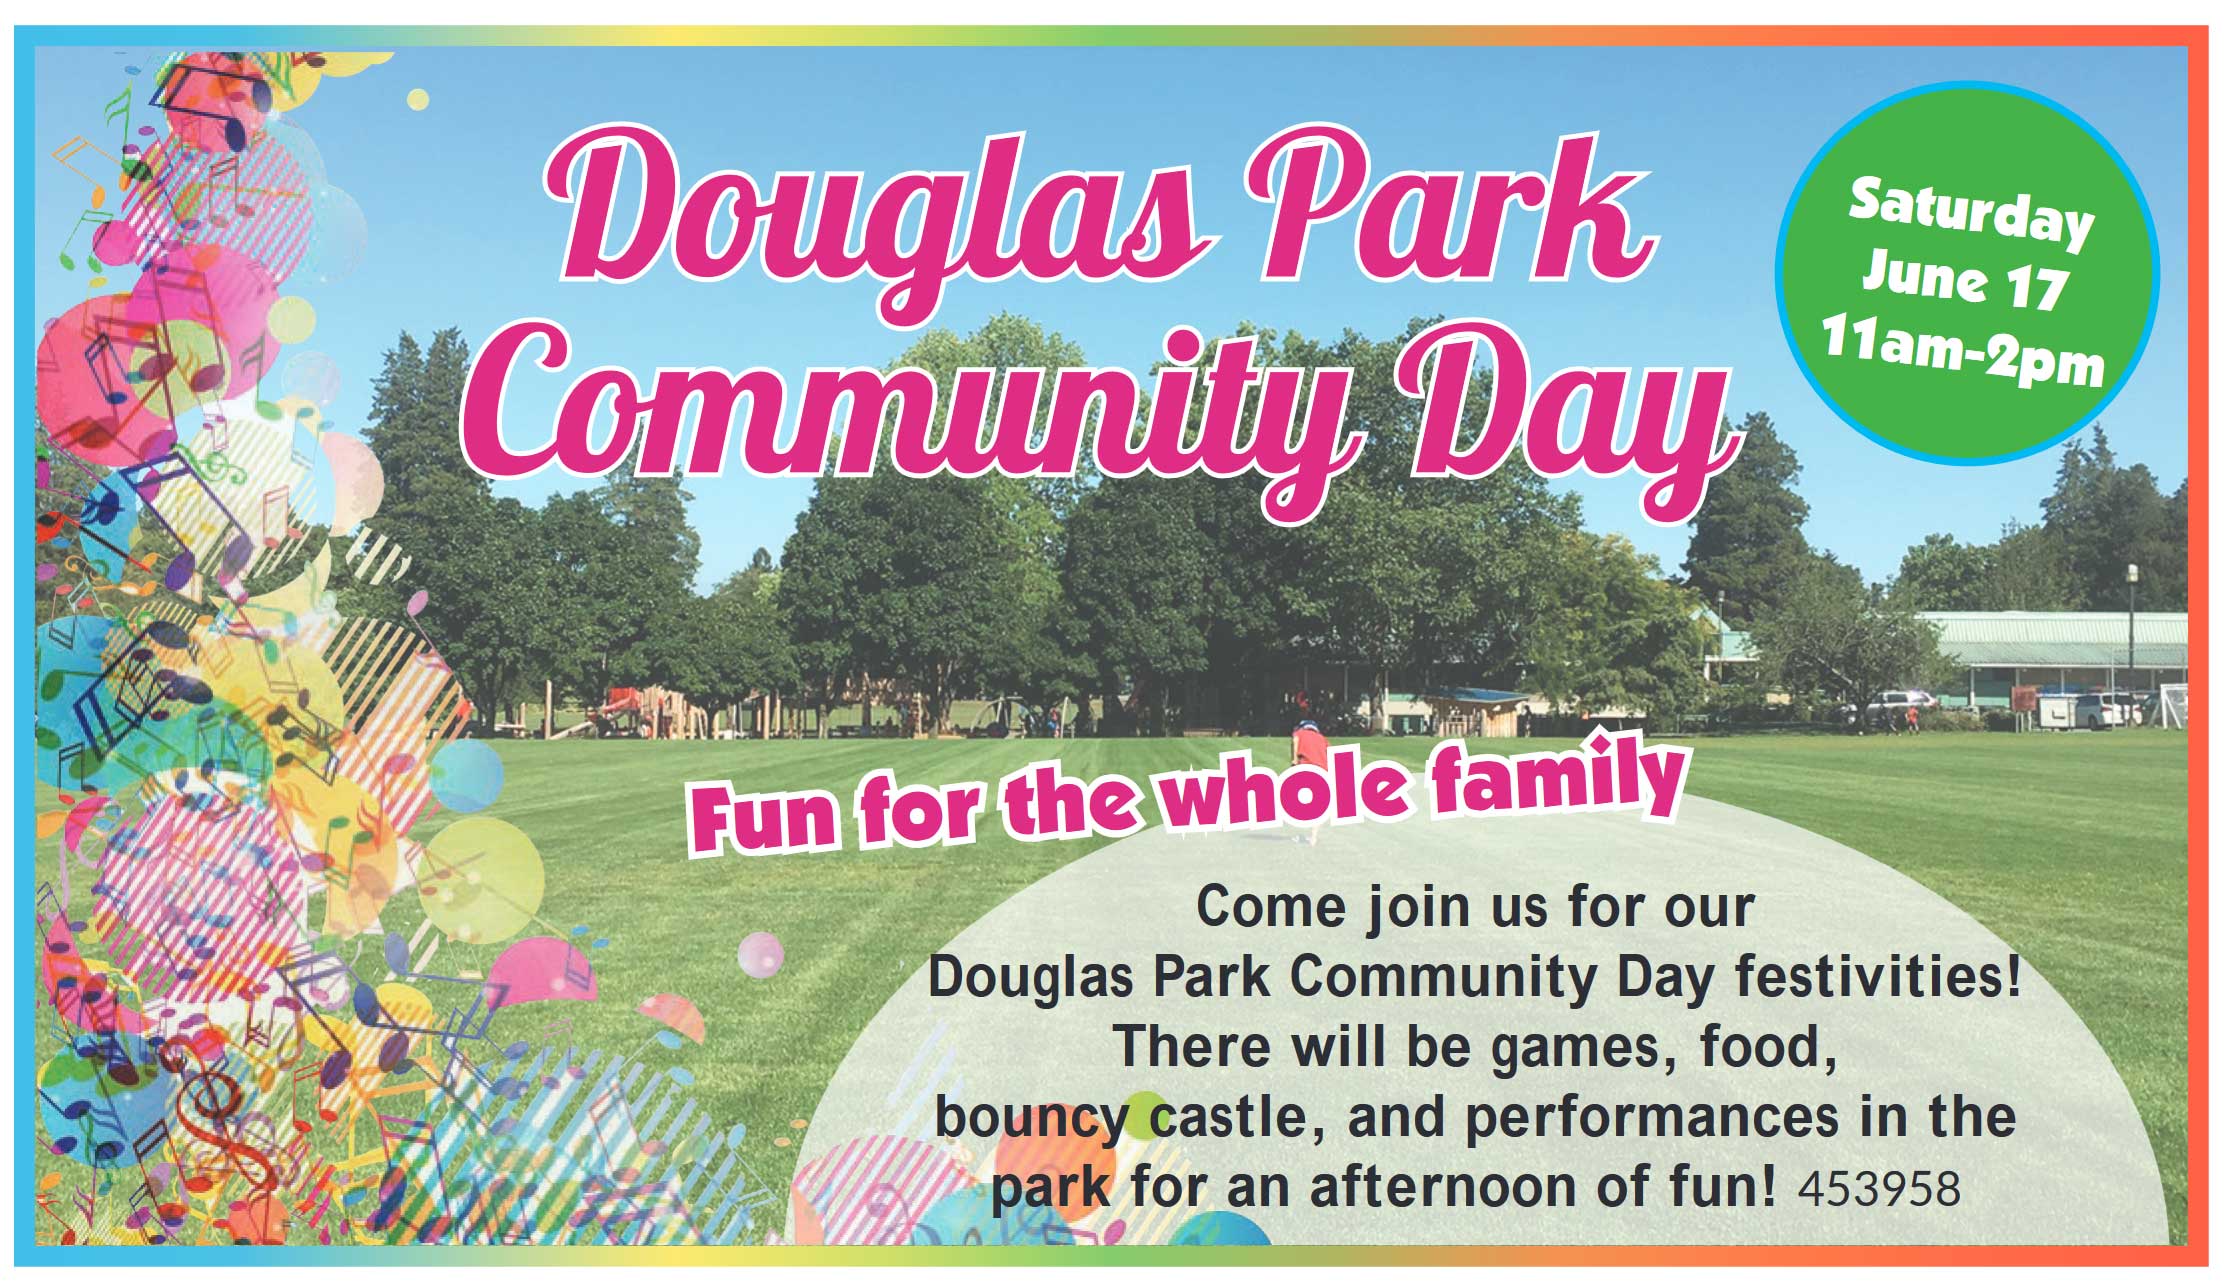 Douglas Park community day is back June 17, 2023. Come join us for our Douglas Park Community Day festivities! There will be games, food, bouncy castle, and performances in the park for an afternoon of fun!